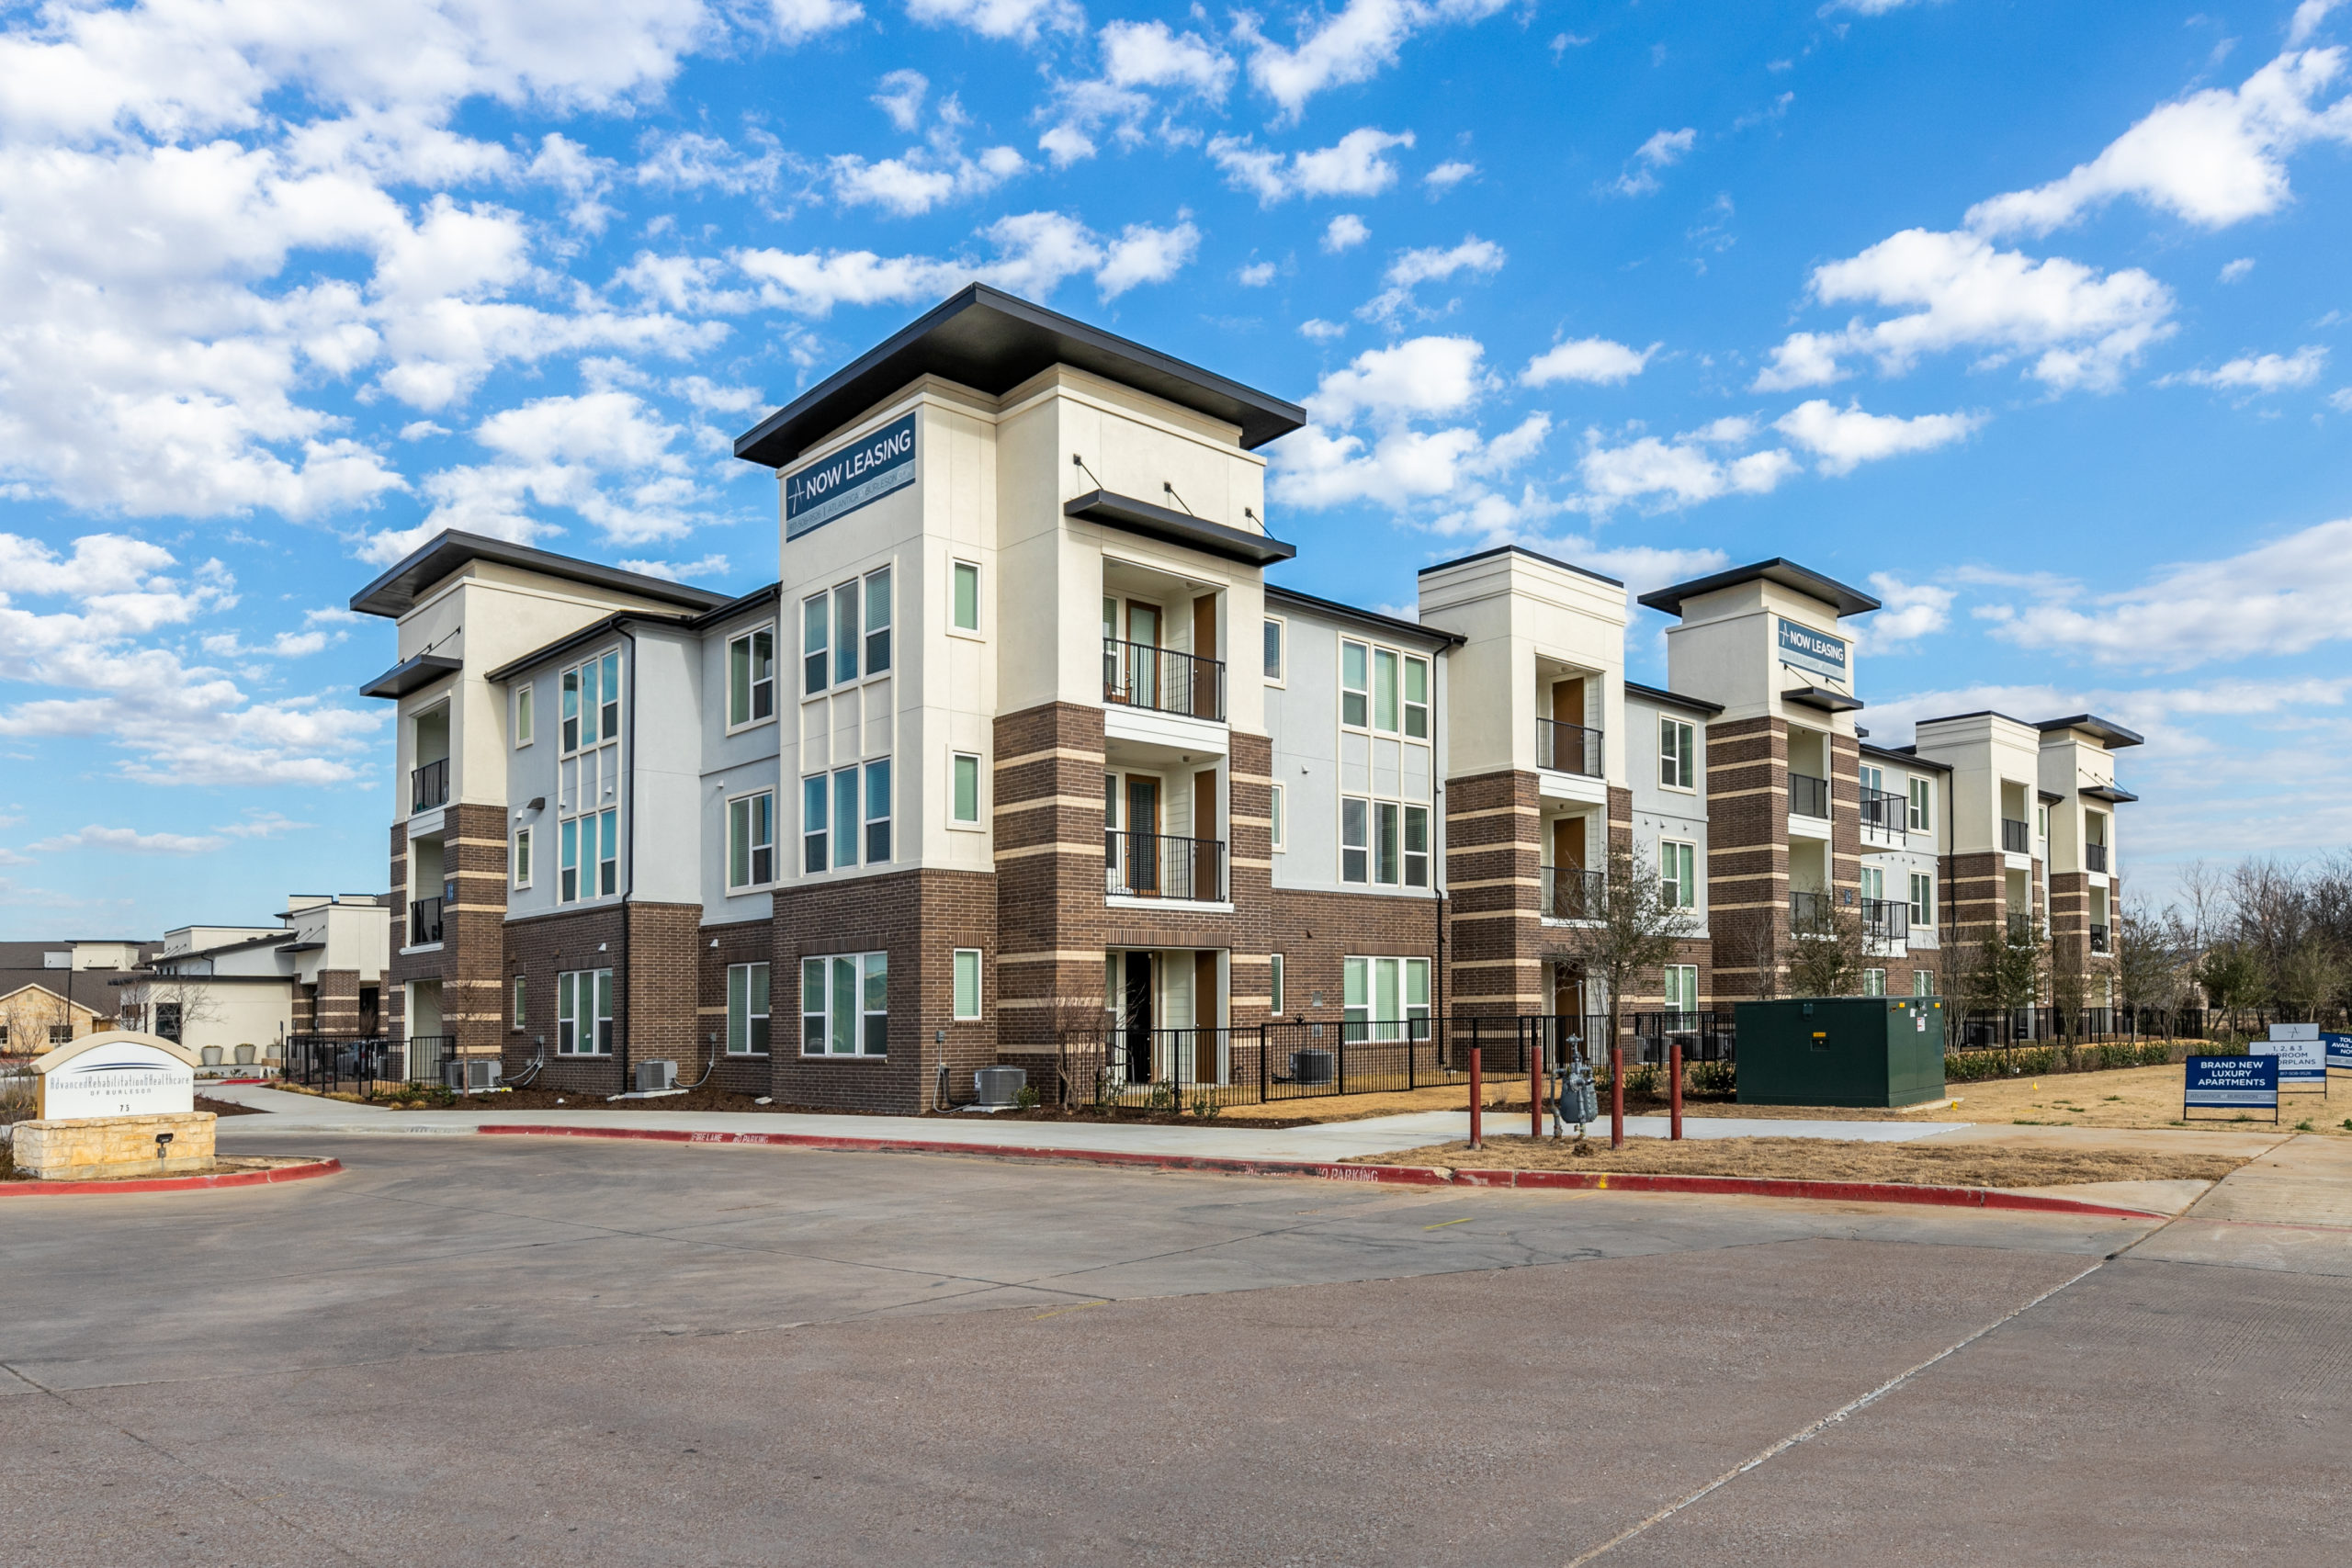 Dolce Living Burleson Located South of the Growing Fort Worth Area